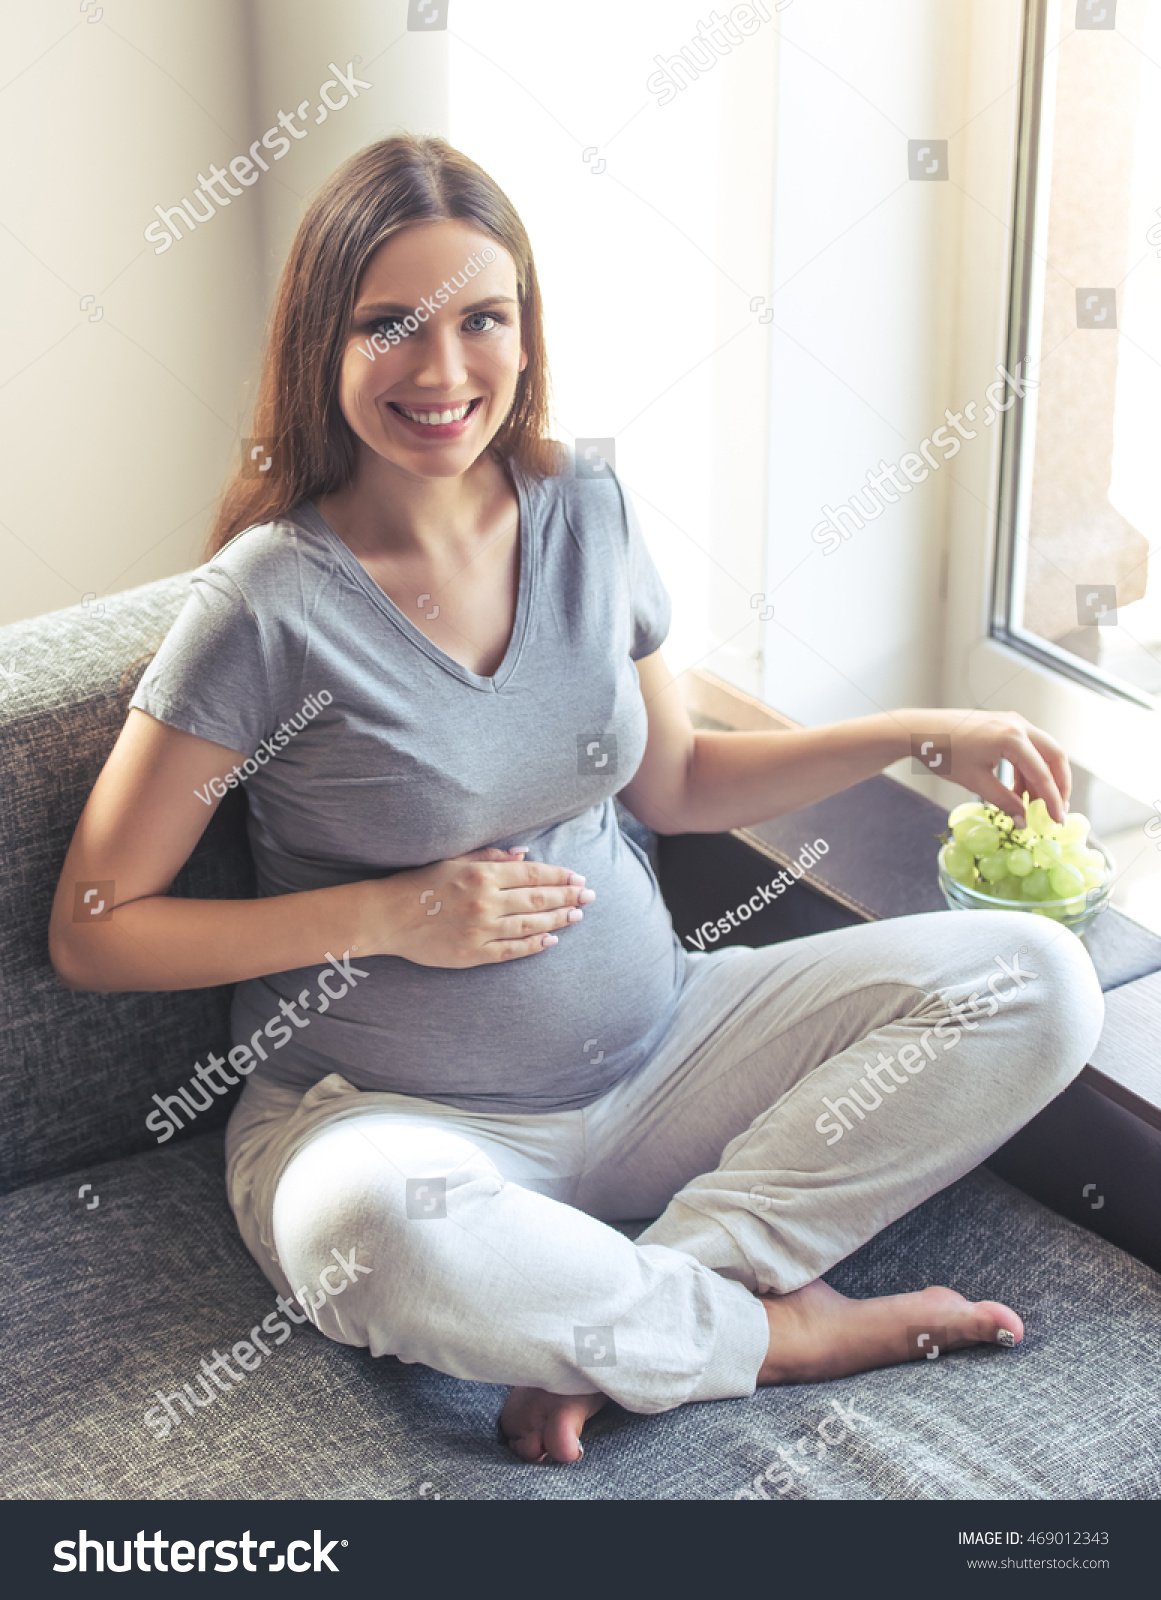 Beautiful pregnant woman is eating grape, holding one hand on her tummy, looking at camera and smiling while sitting on the couch at home #469012343